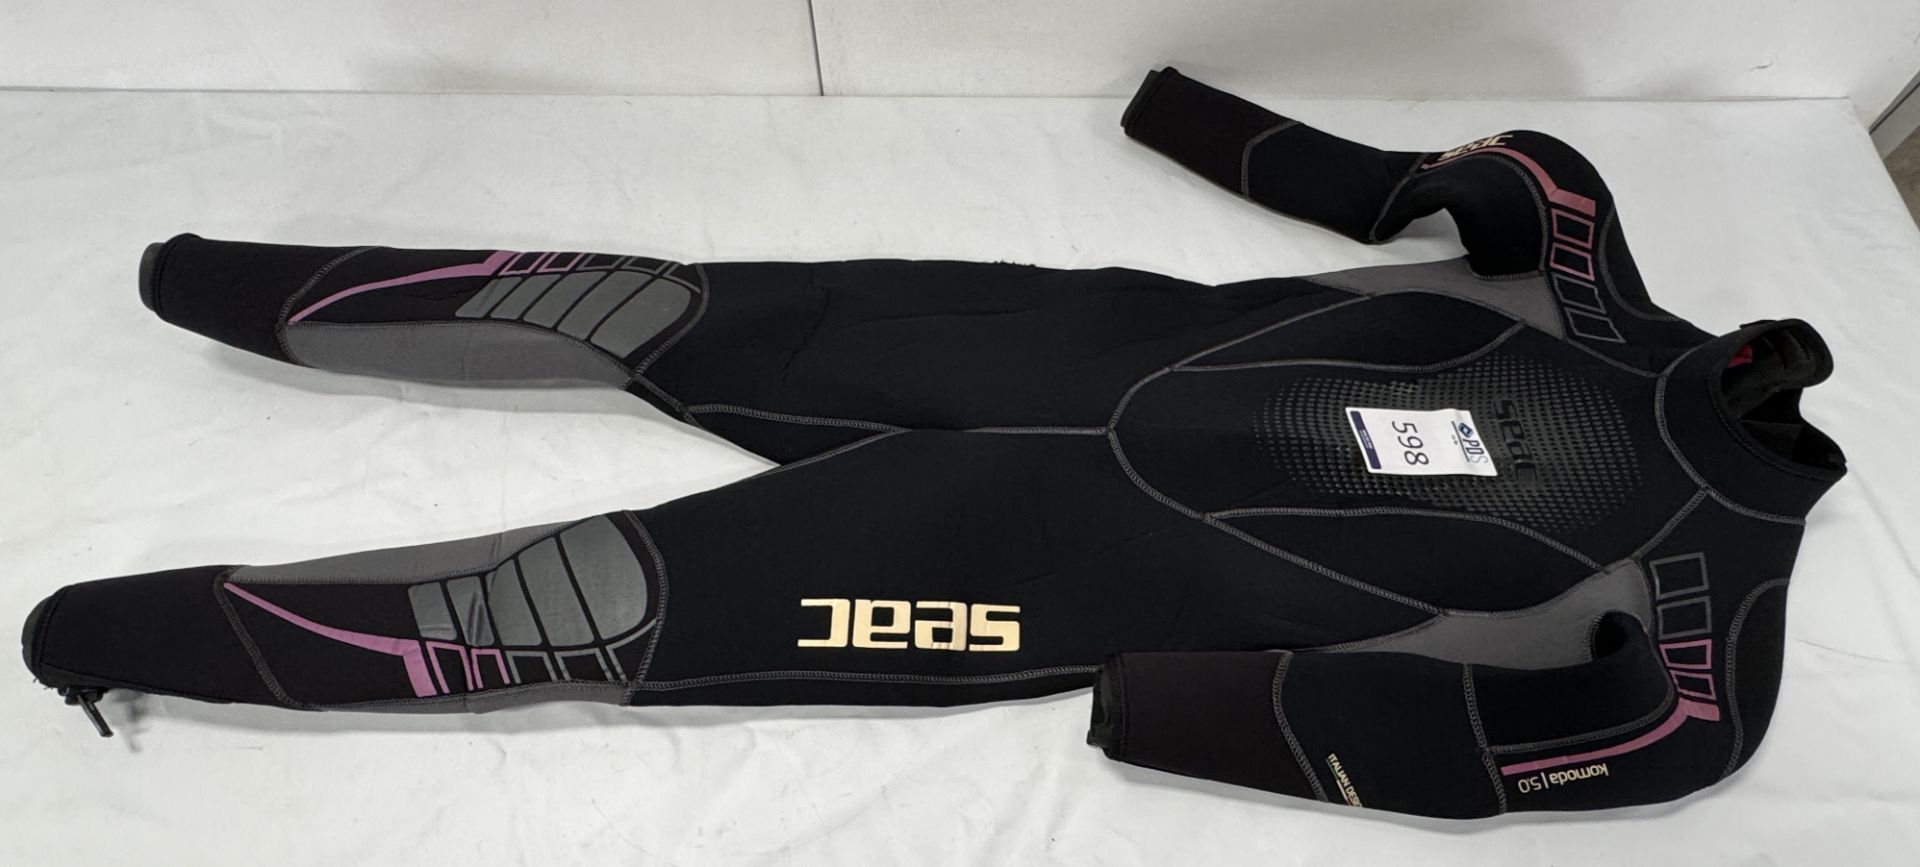 Kids Osprey Wetsuit, Aqua Lung Woman’s Wetsuit (Size M), Beuchat & Seac Wetsuits (Location: - Image 2 of 10